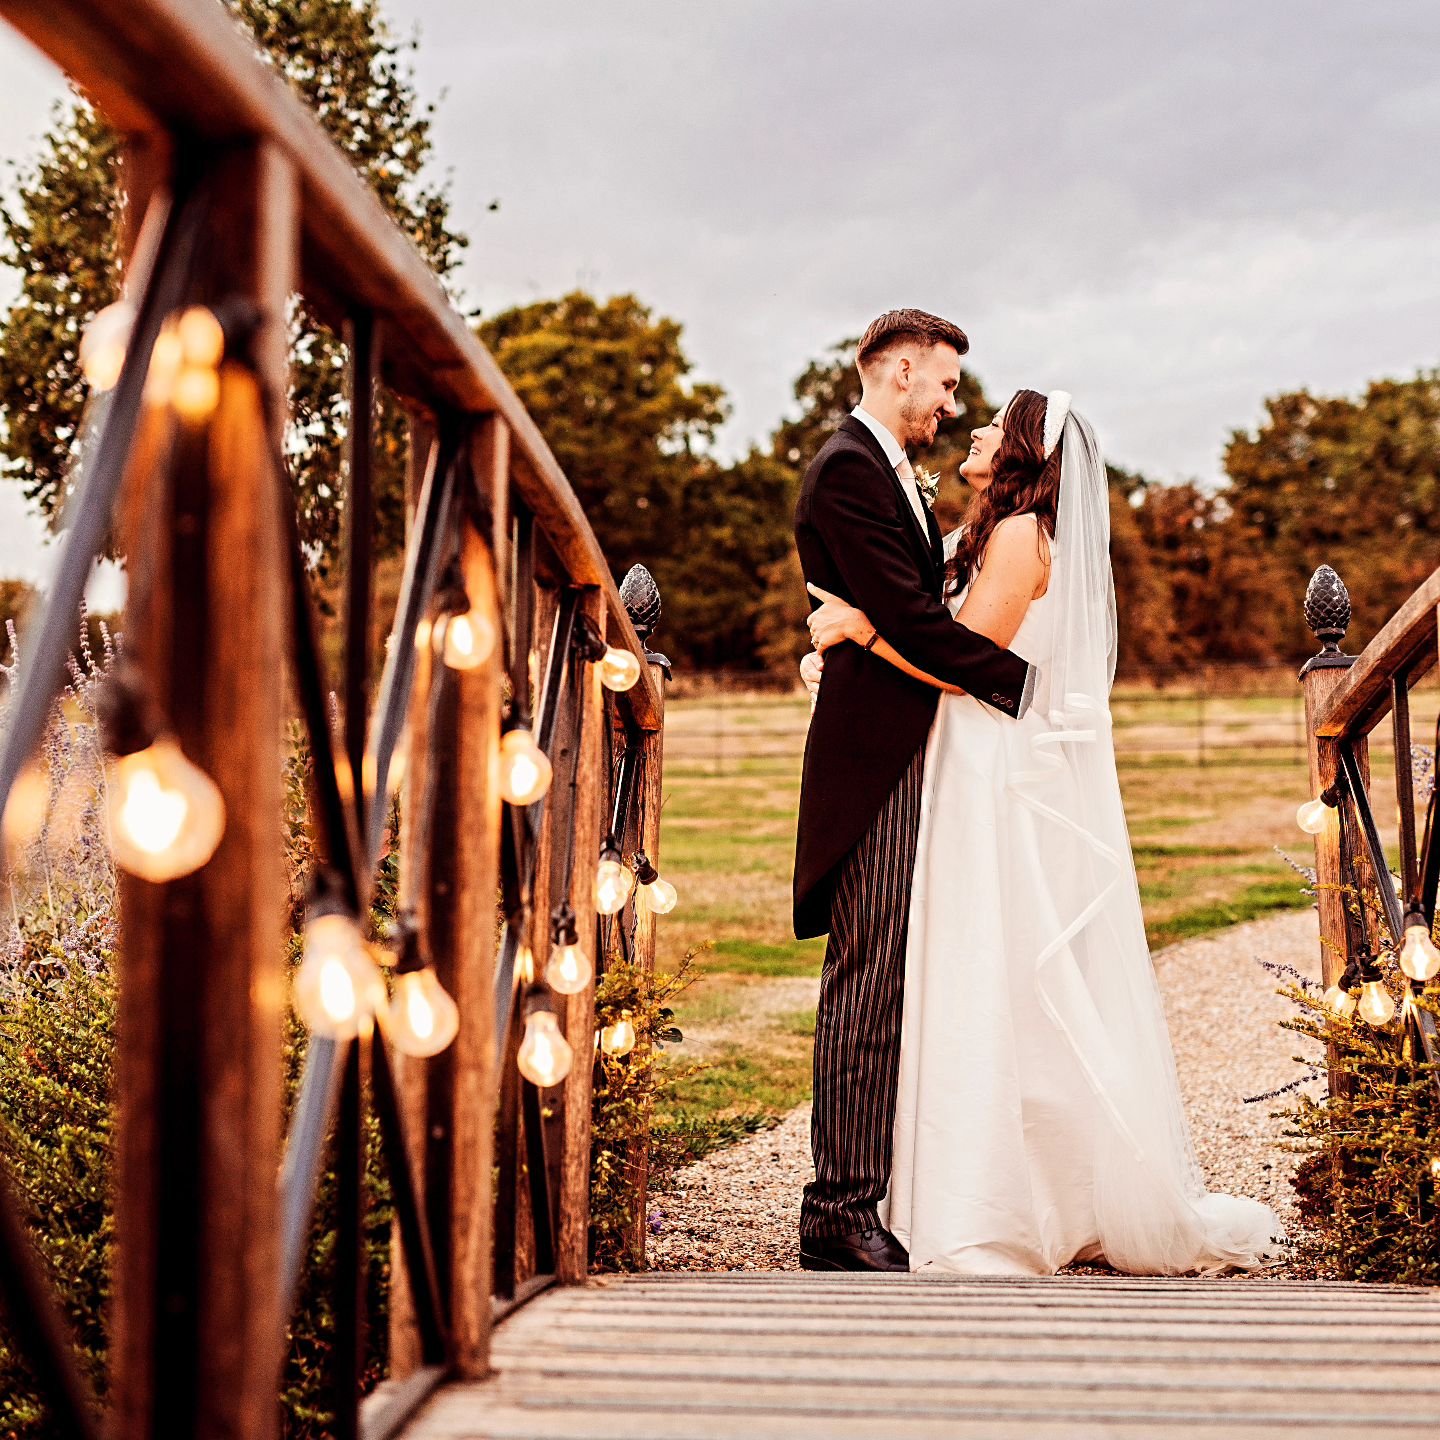 Interested in marrying at the estate this year with the stunning backdrop of the suffolk countryside? We have the perfect autumn wedding offer for you! 🍁

For a limited time, we're offering a reduction in the cost of a wedding, either weekend or wee